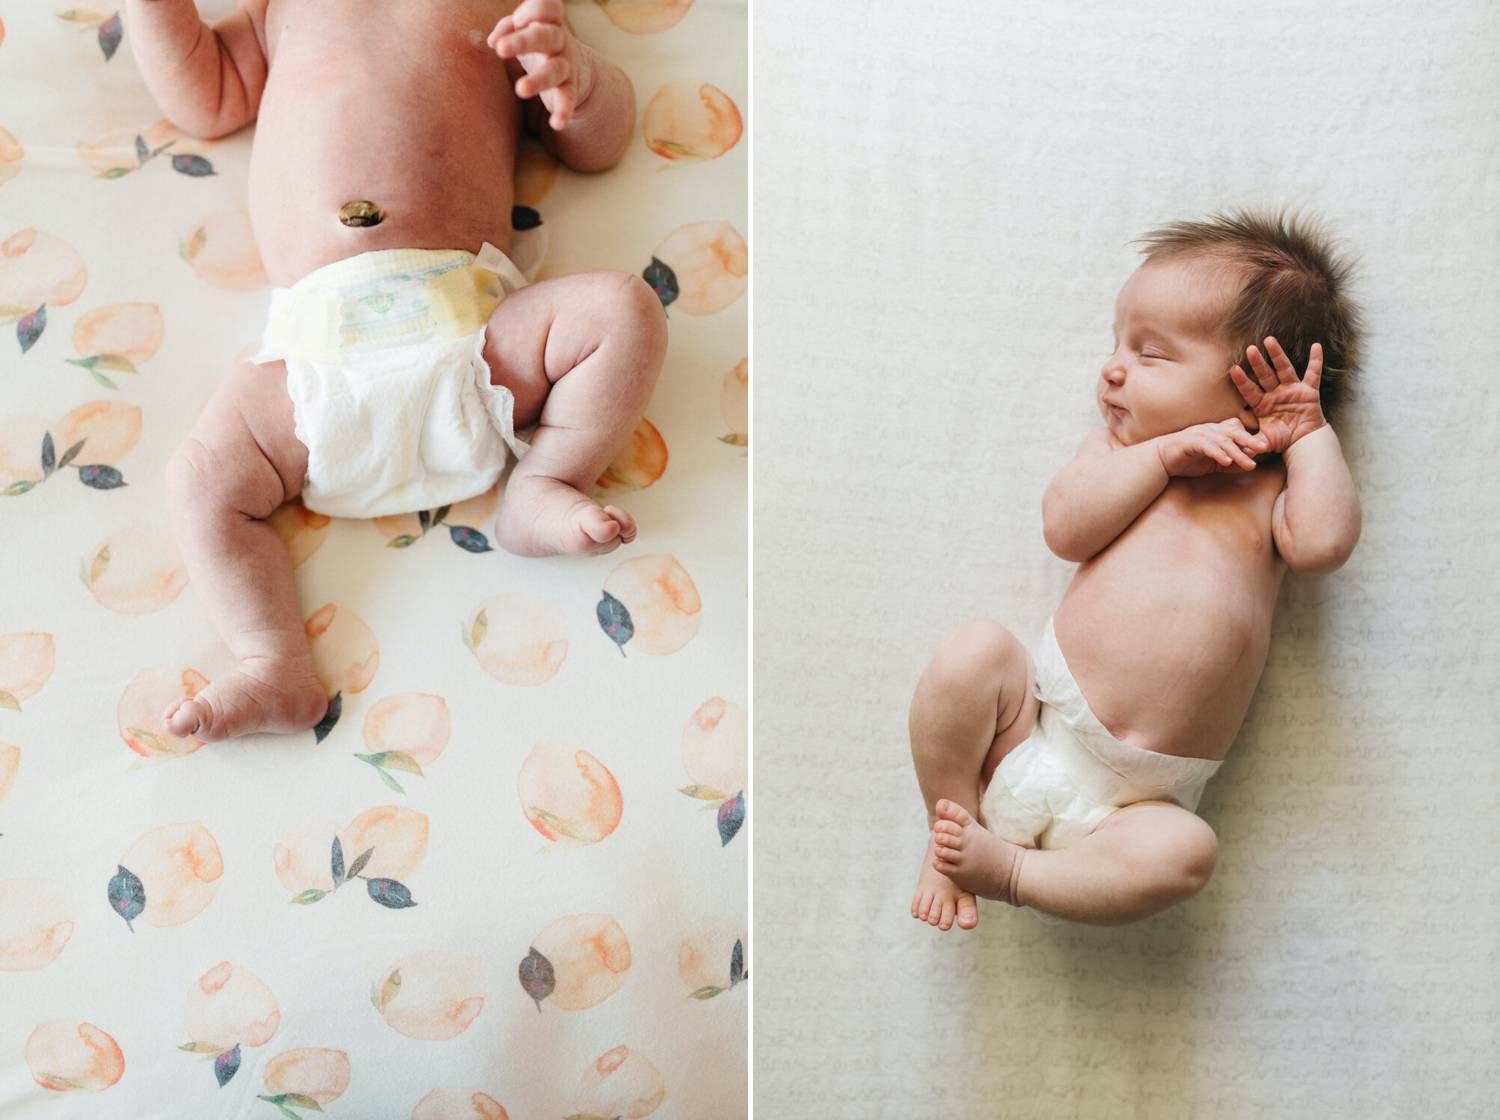 Photos: Cristin More's newborn portraits show side-by-side the difference a day makes. On the left, the baby lies on a printed sheet and the stub of their imbelical cord is visible. In the right photo, the baby's cord is gone.